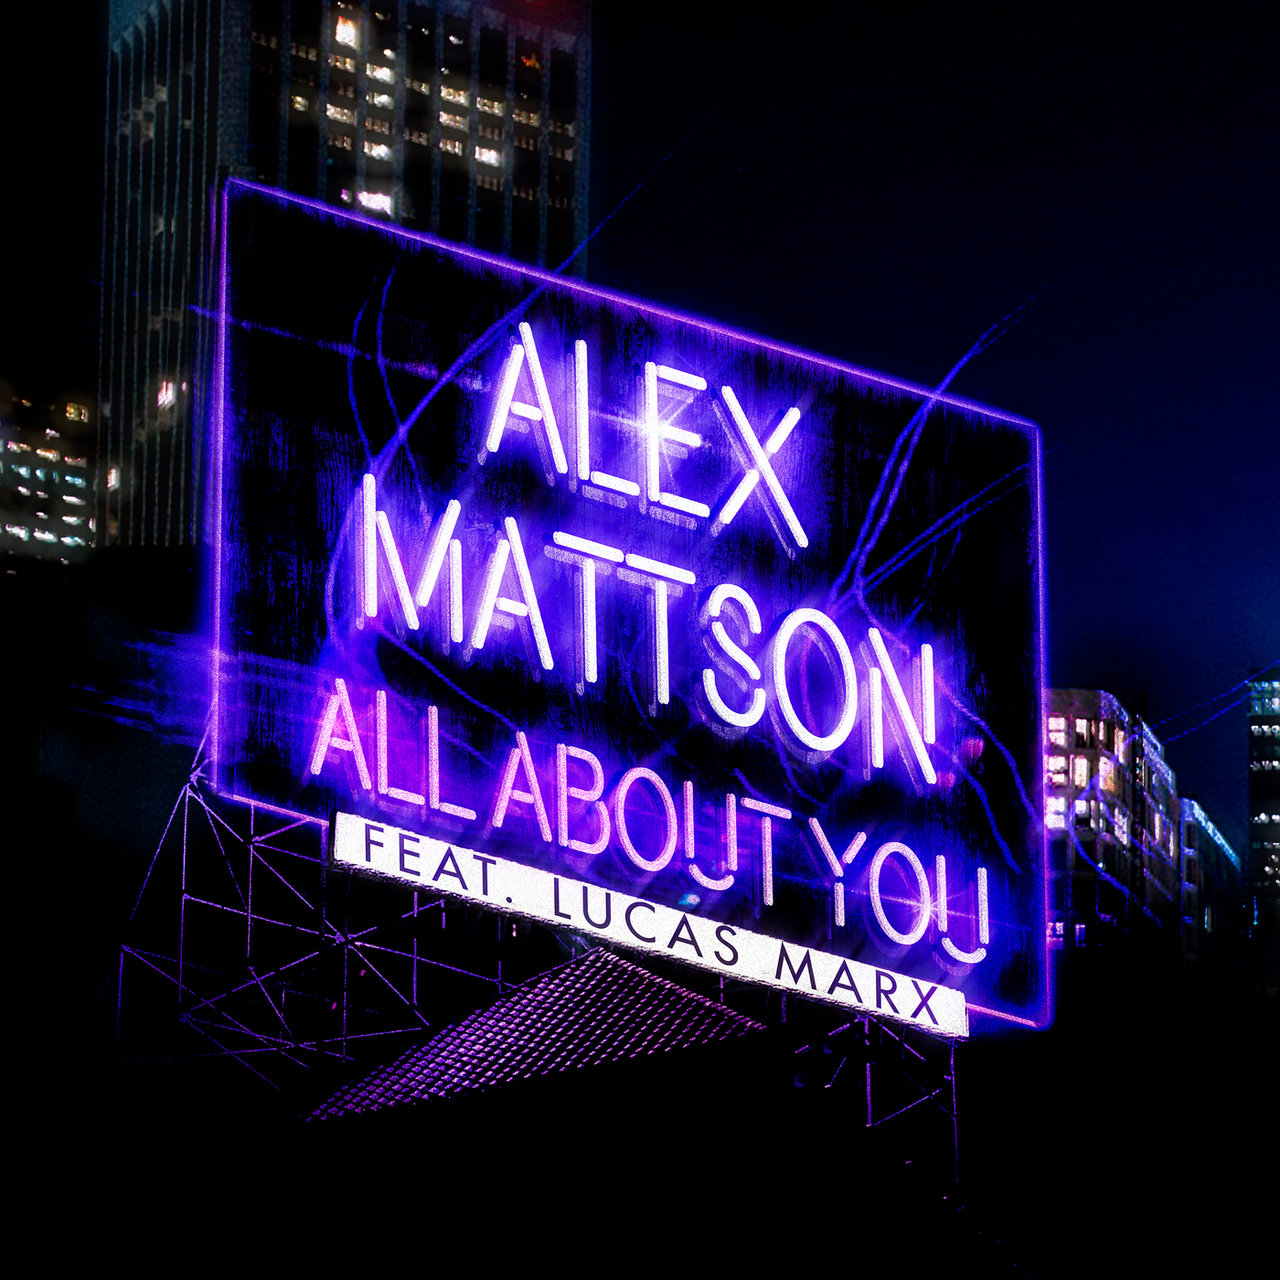 Alex Mattson featuring Lucas Marx — All About You cover artwork